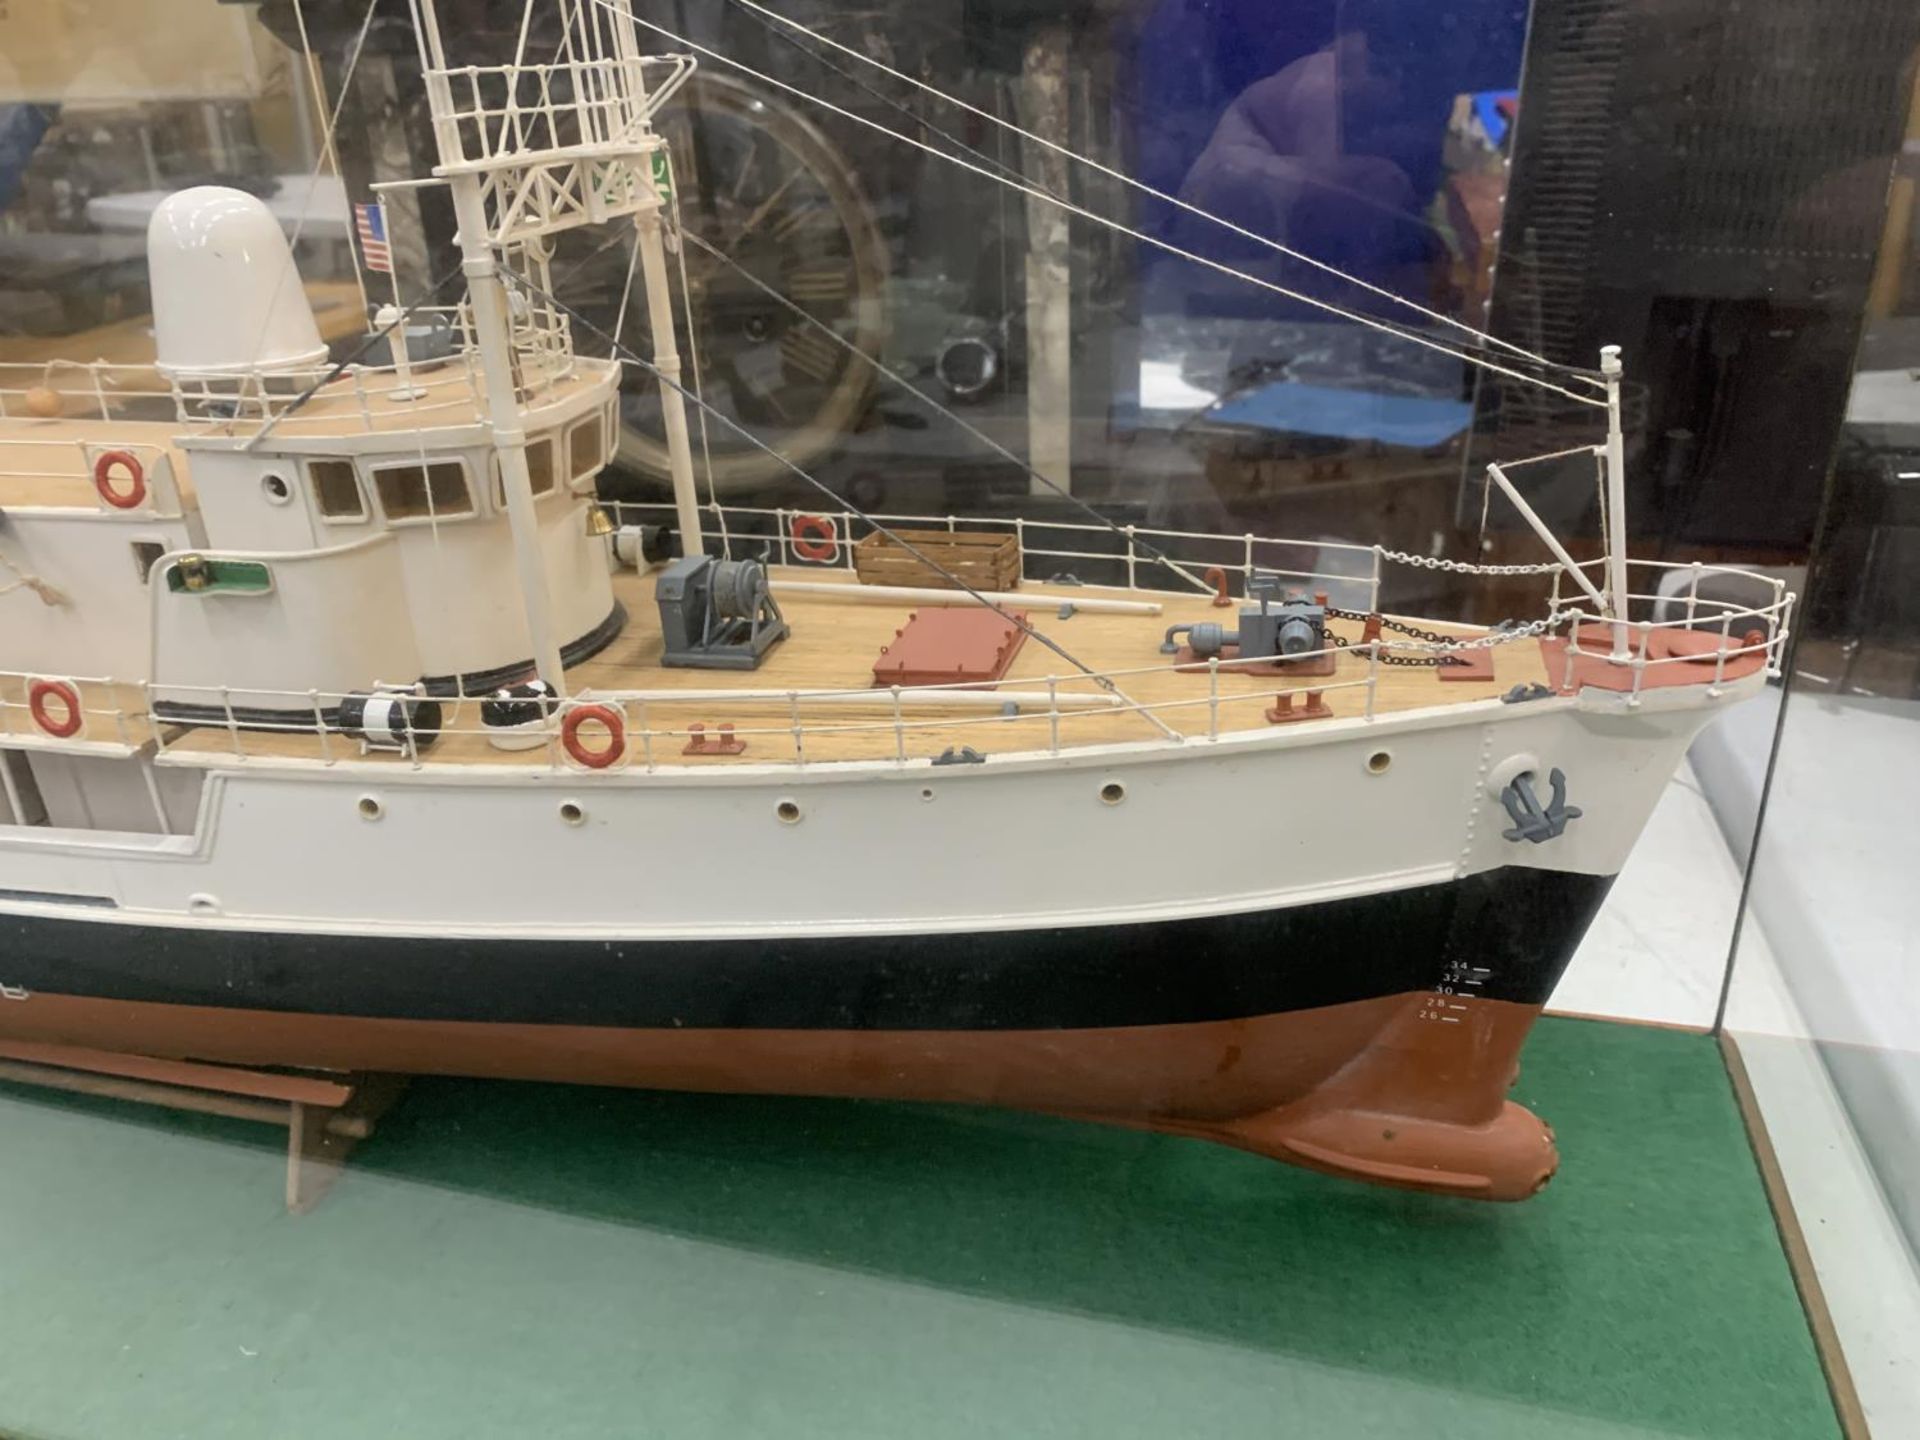 A LARGE MODEL OF A BOAT WITH HELICOPTER IN A GLASS CASE - Image 4 of 5